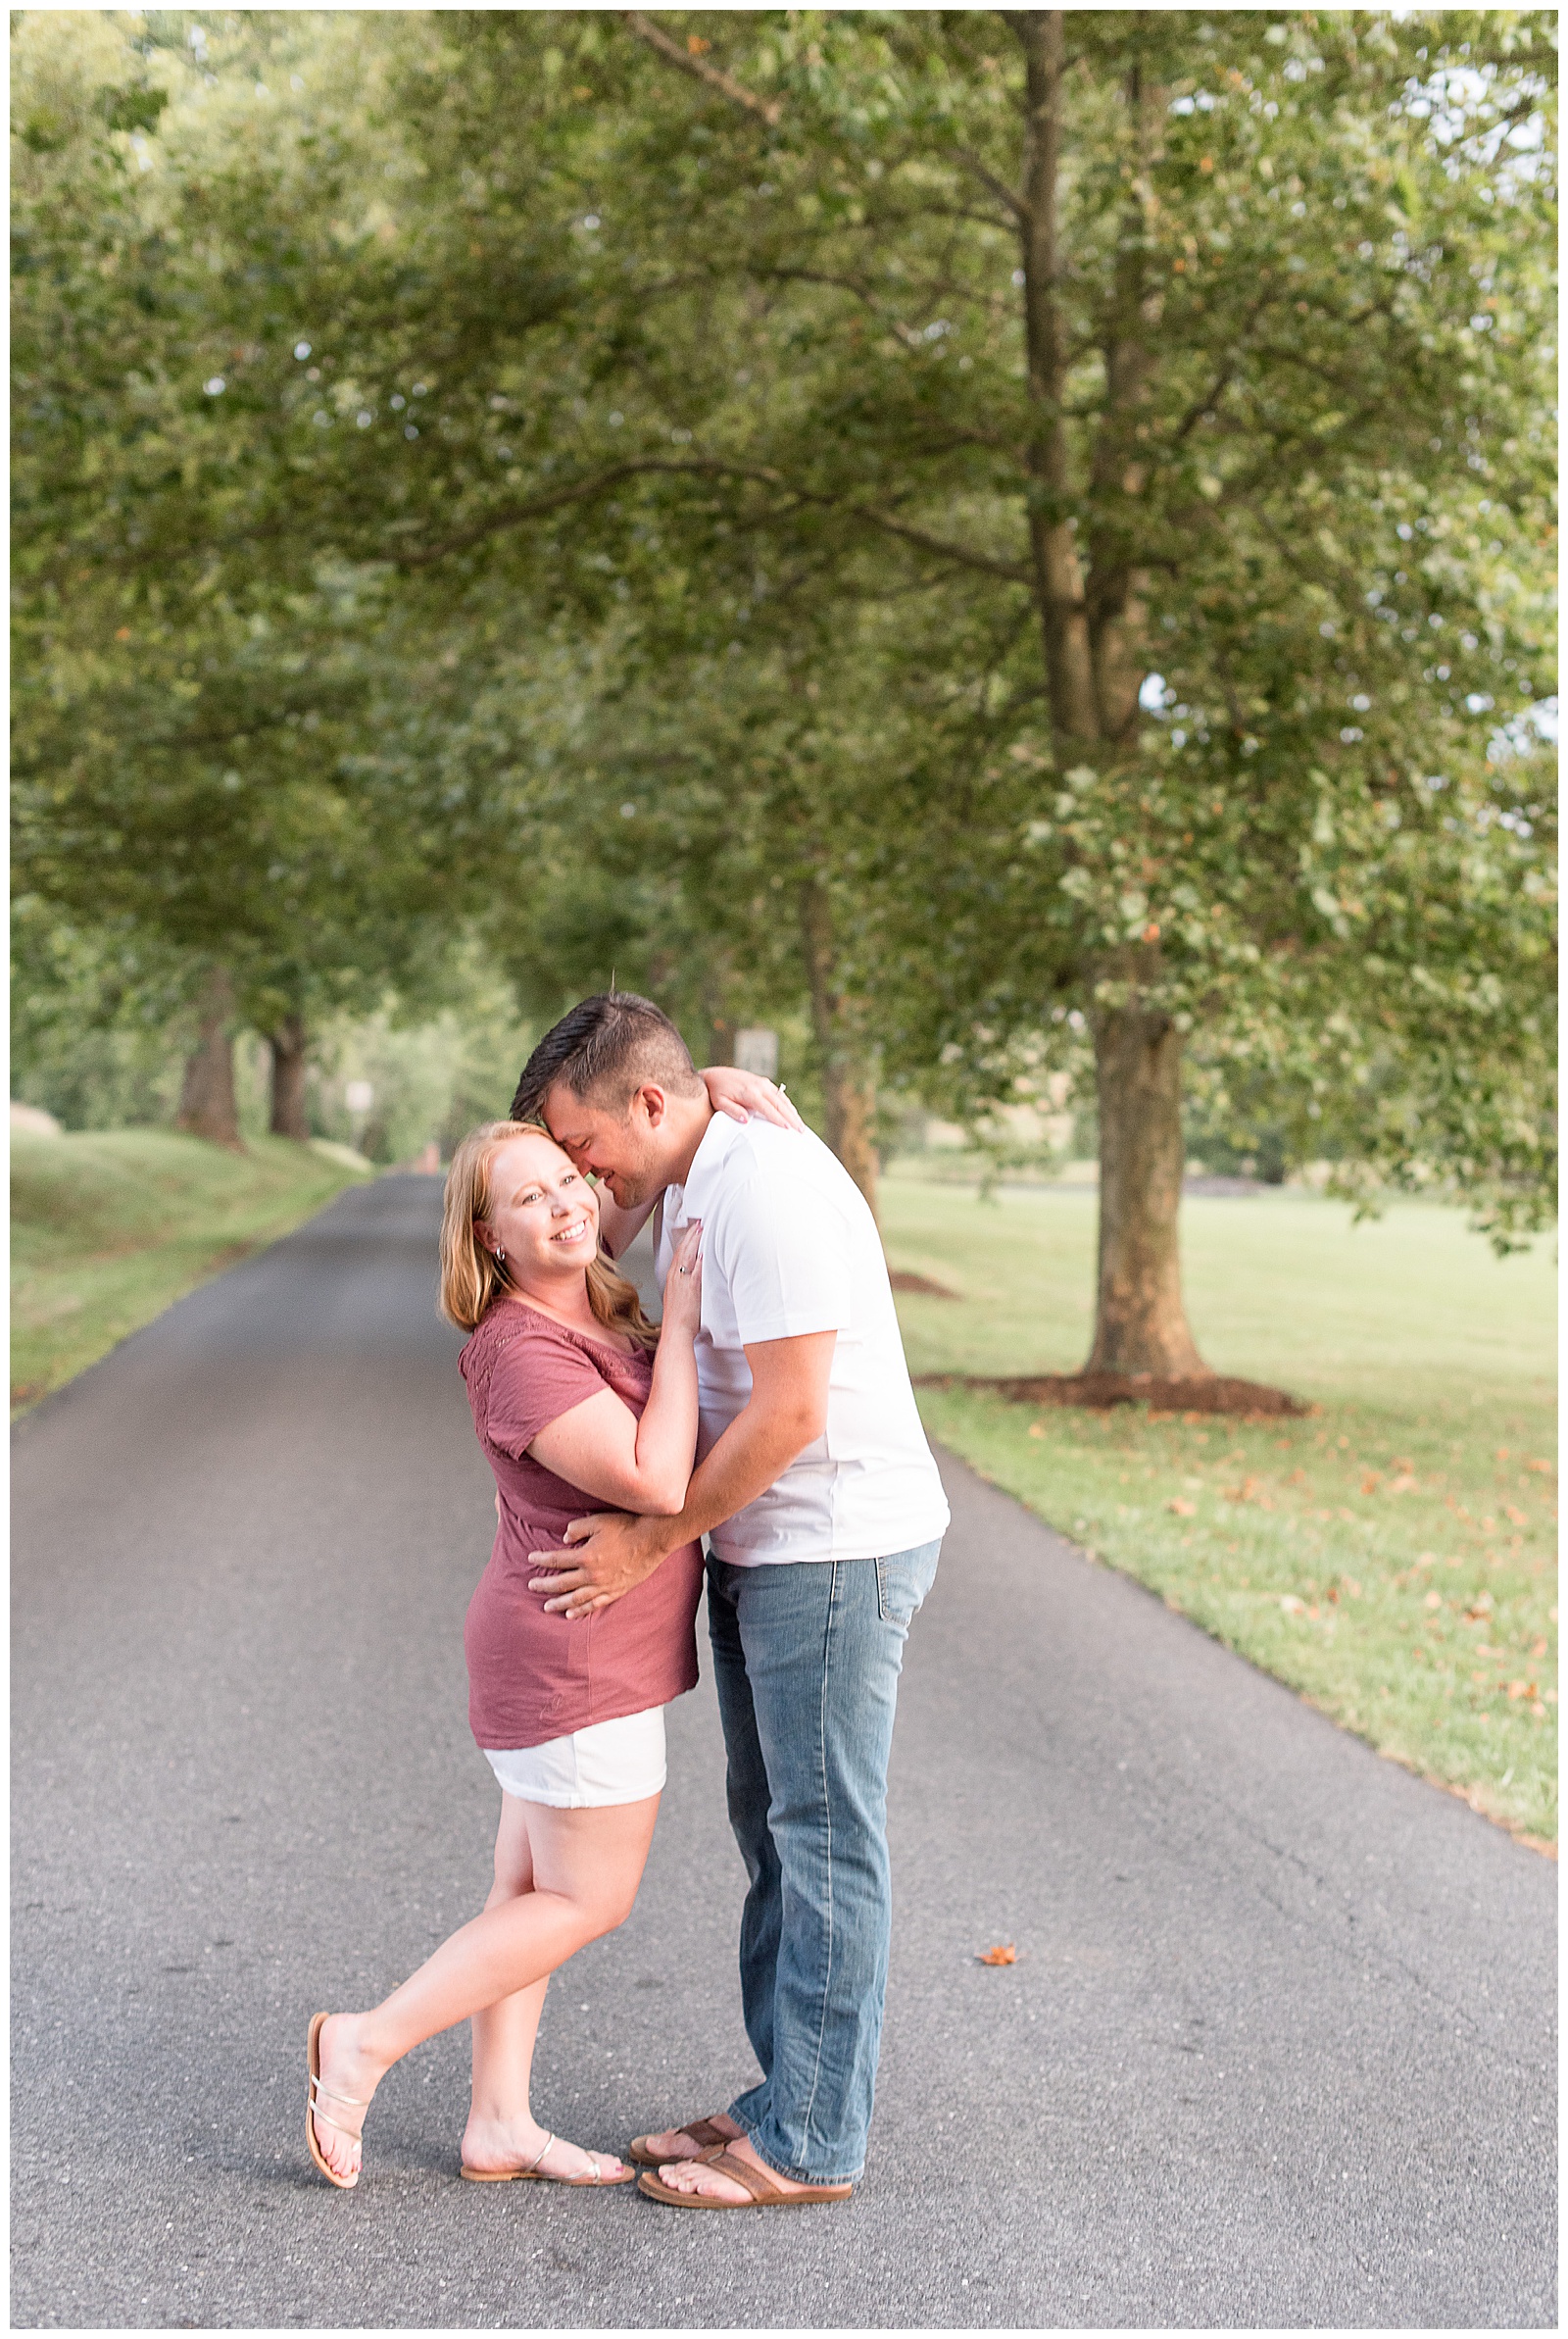 guy kissing girl on cheek in middle of road that is lined with trees